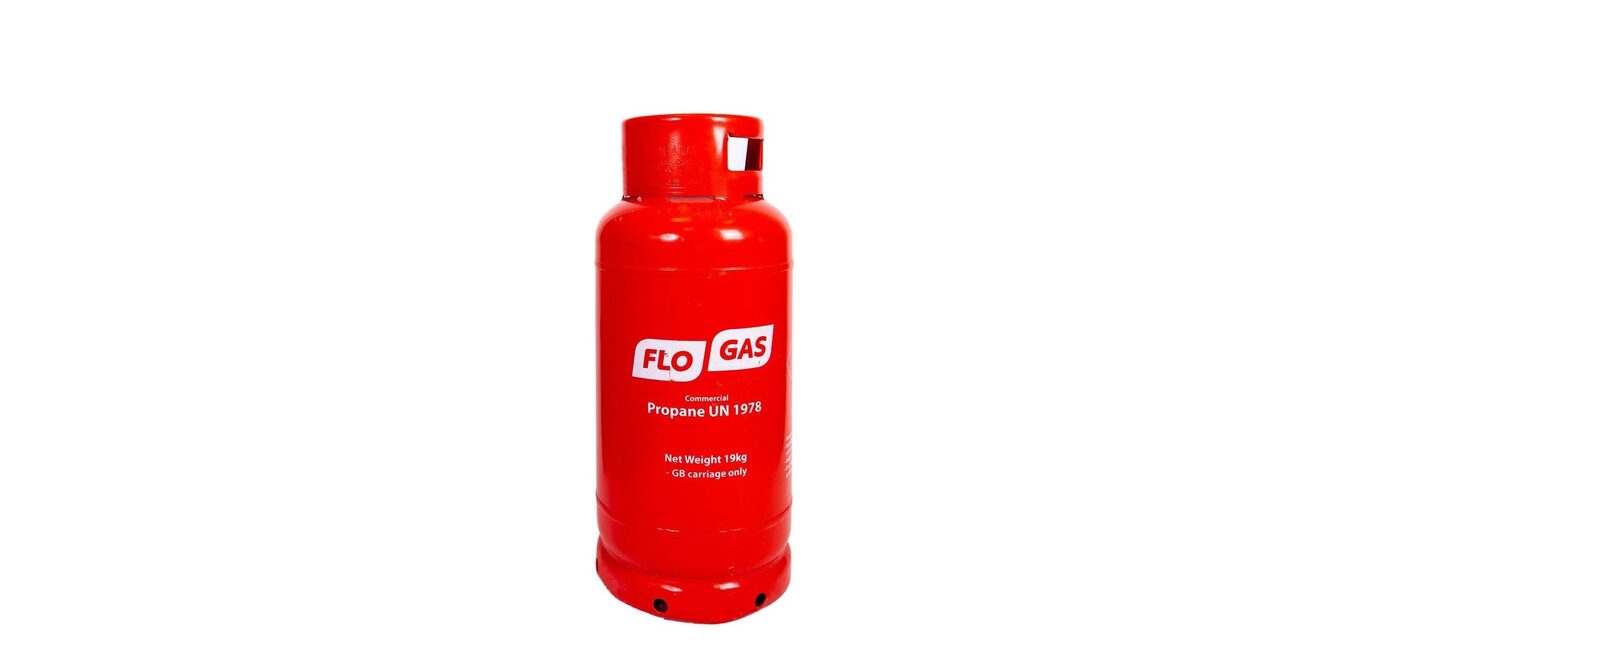 11KG Propane Gas Cylinder, Propane for Mobile Catering and Caravans